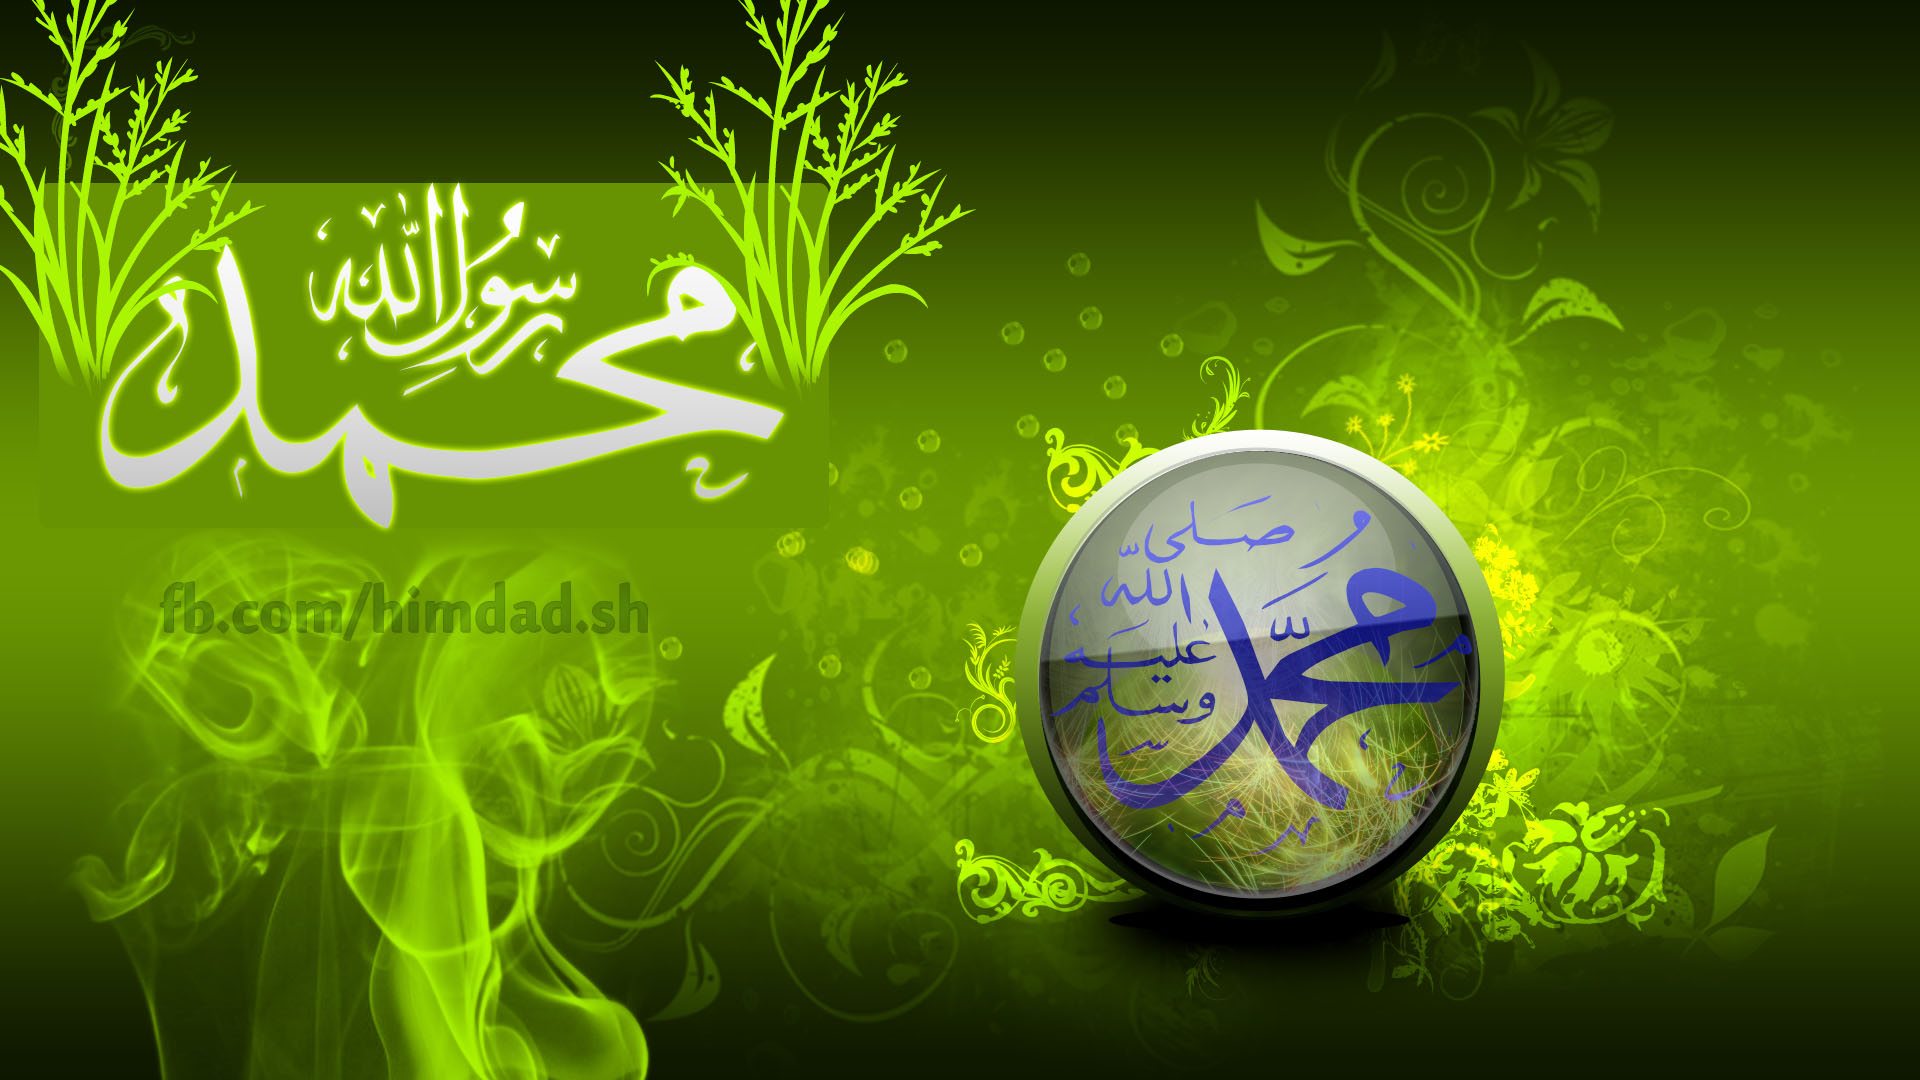 HD Wallpaper X With Prophet Muhammad S Name Arabic